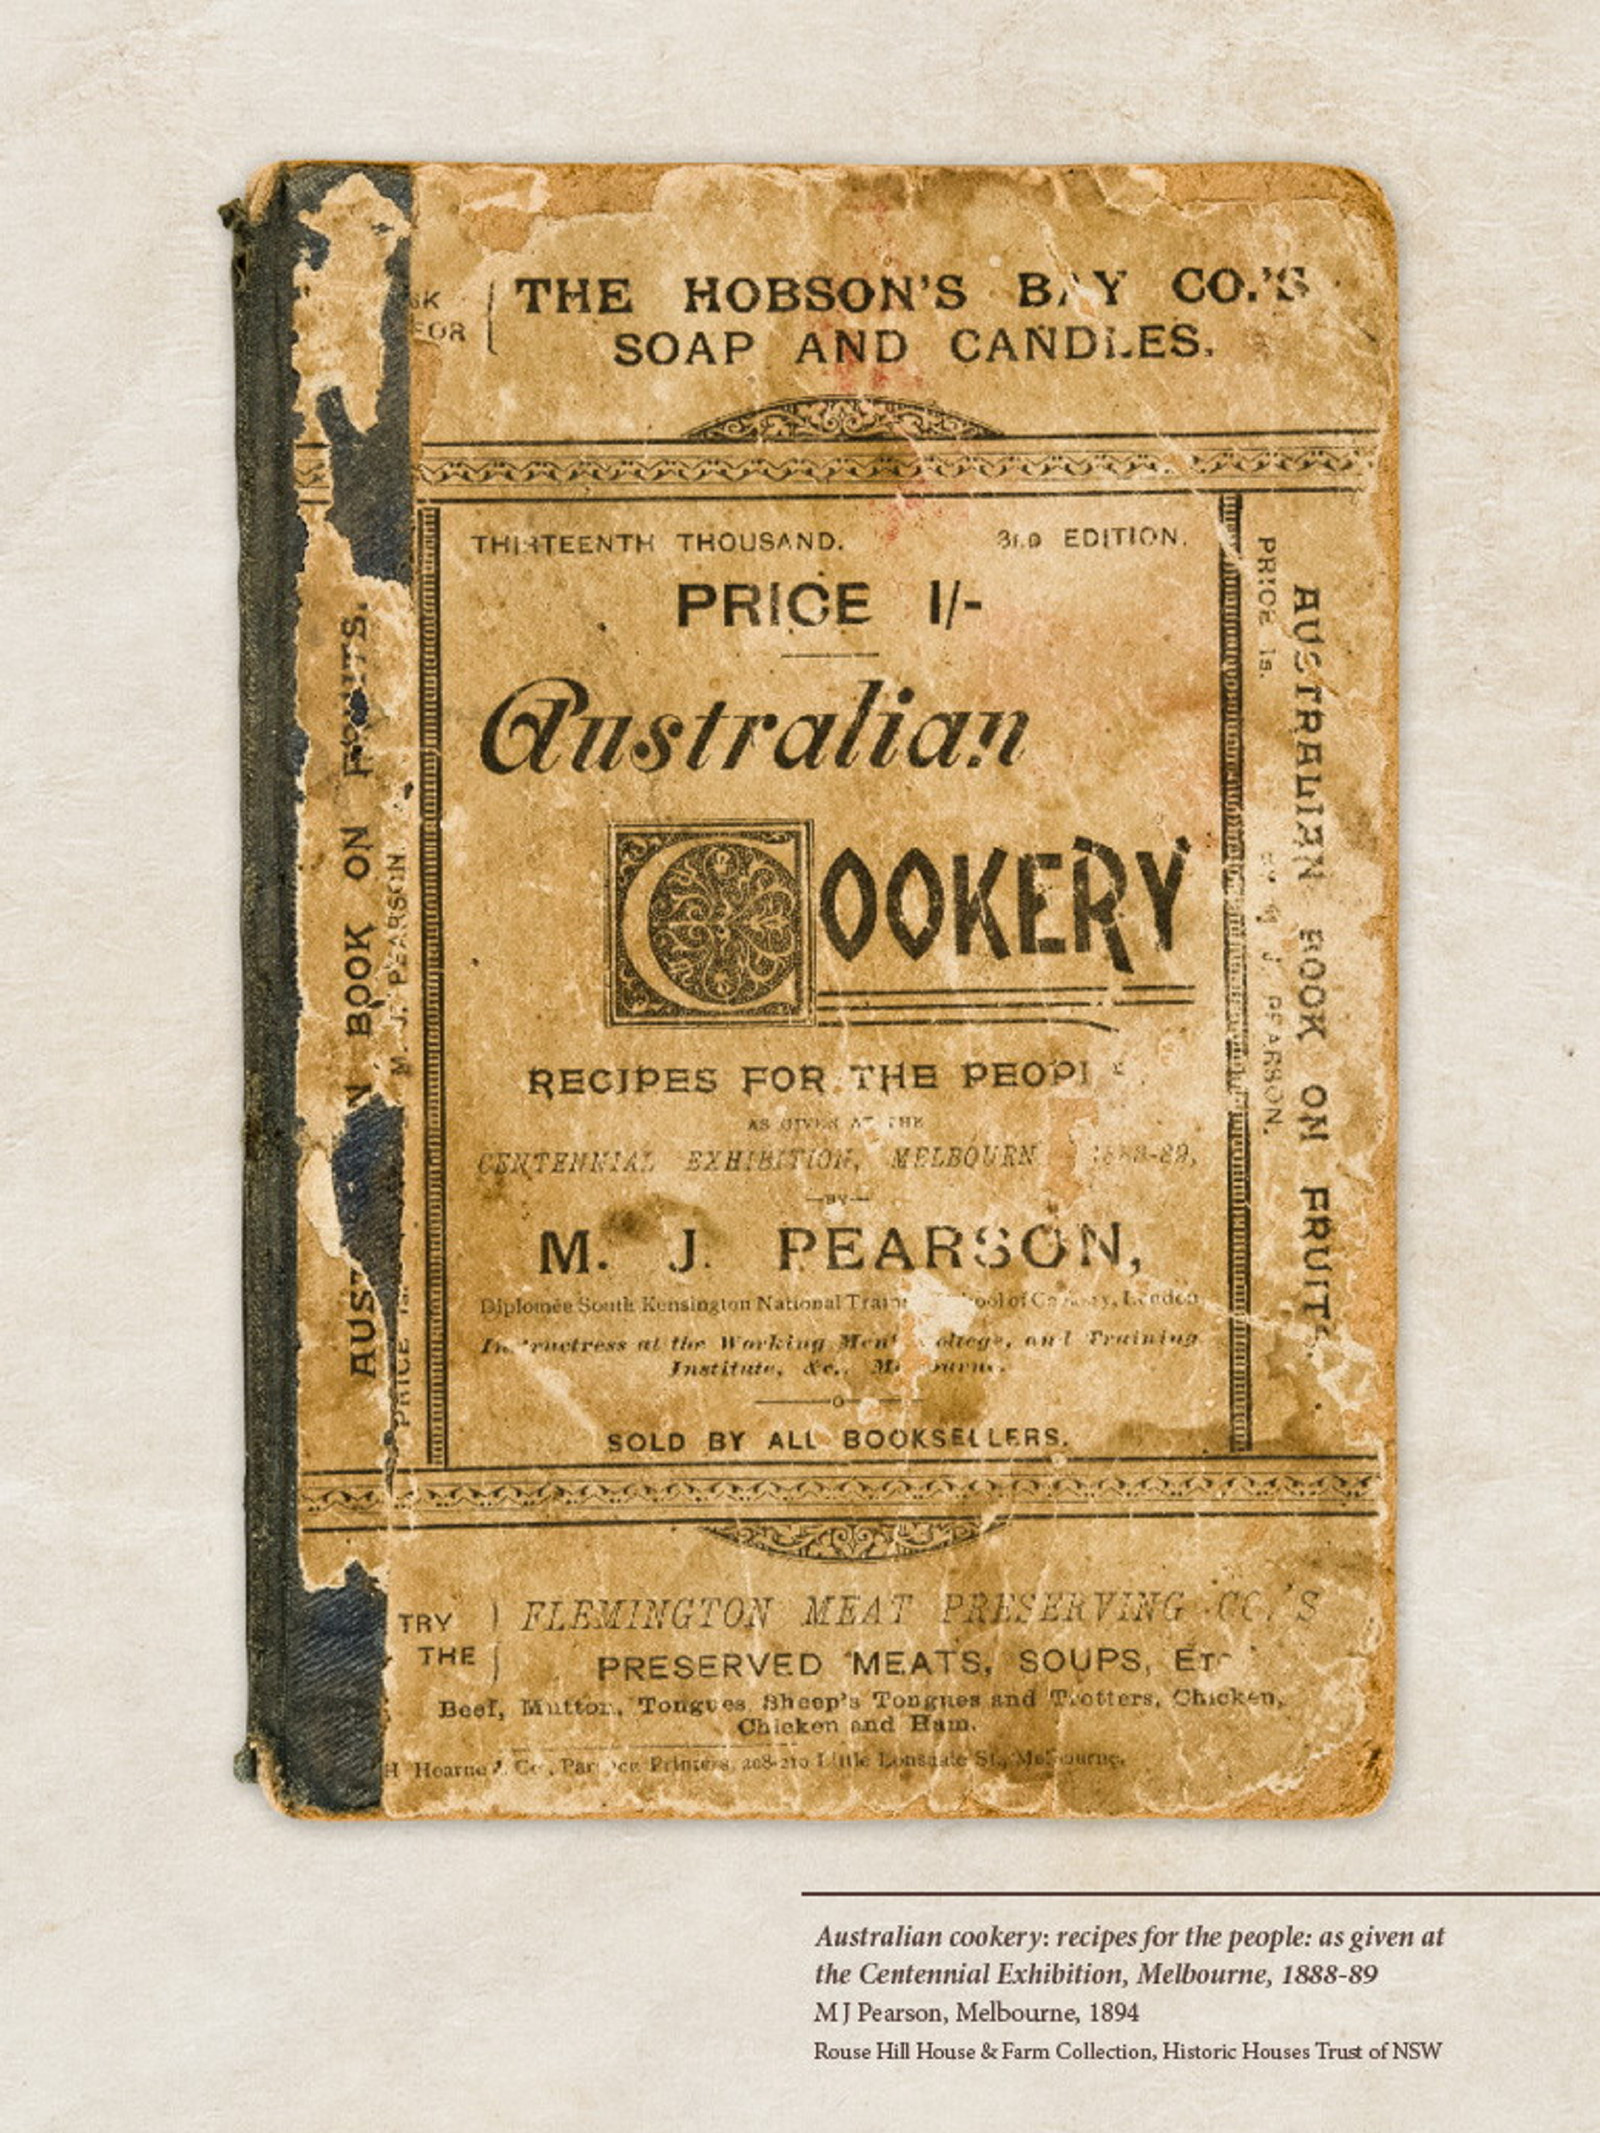 Cover of old recipe book.